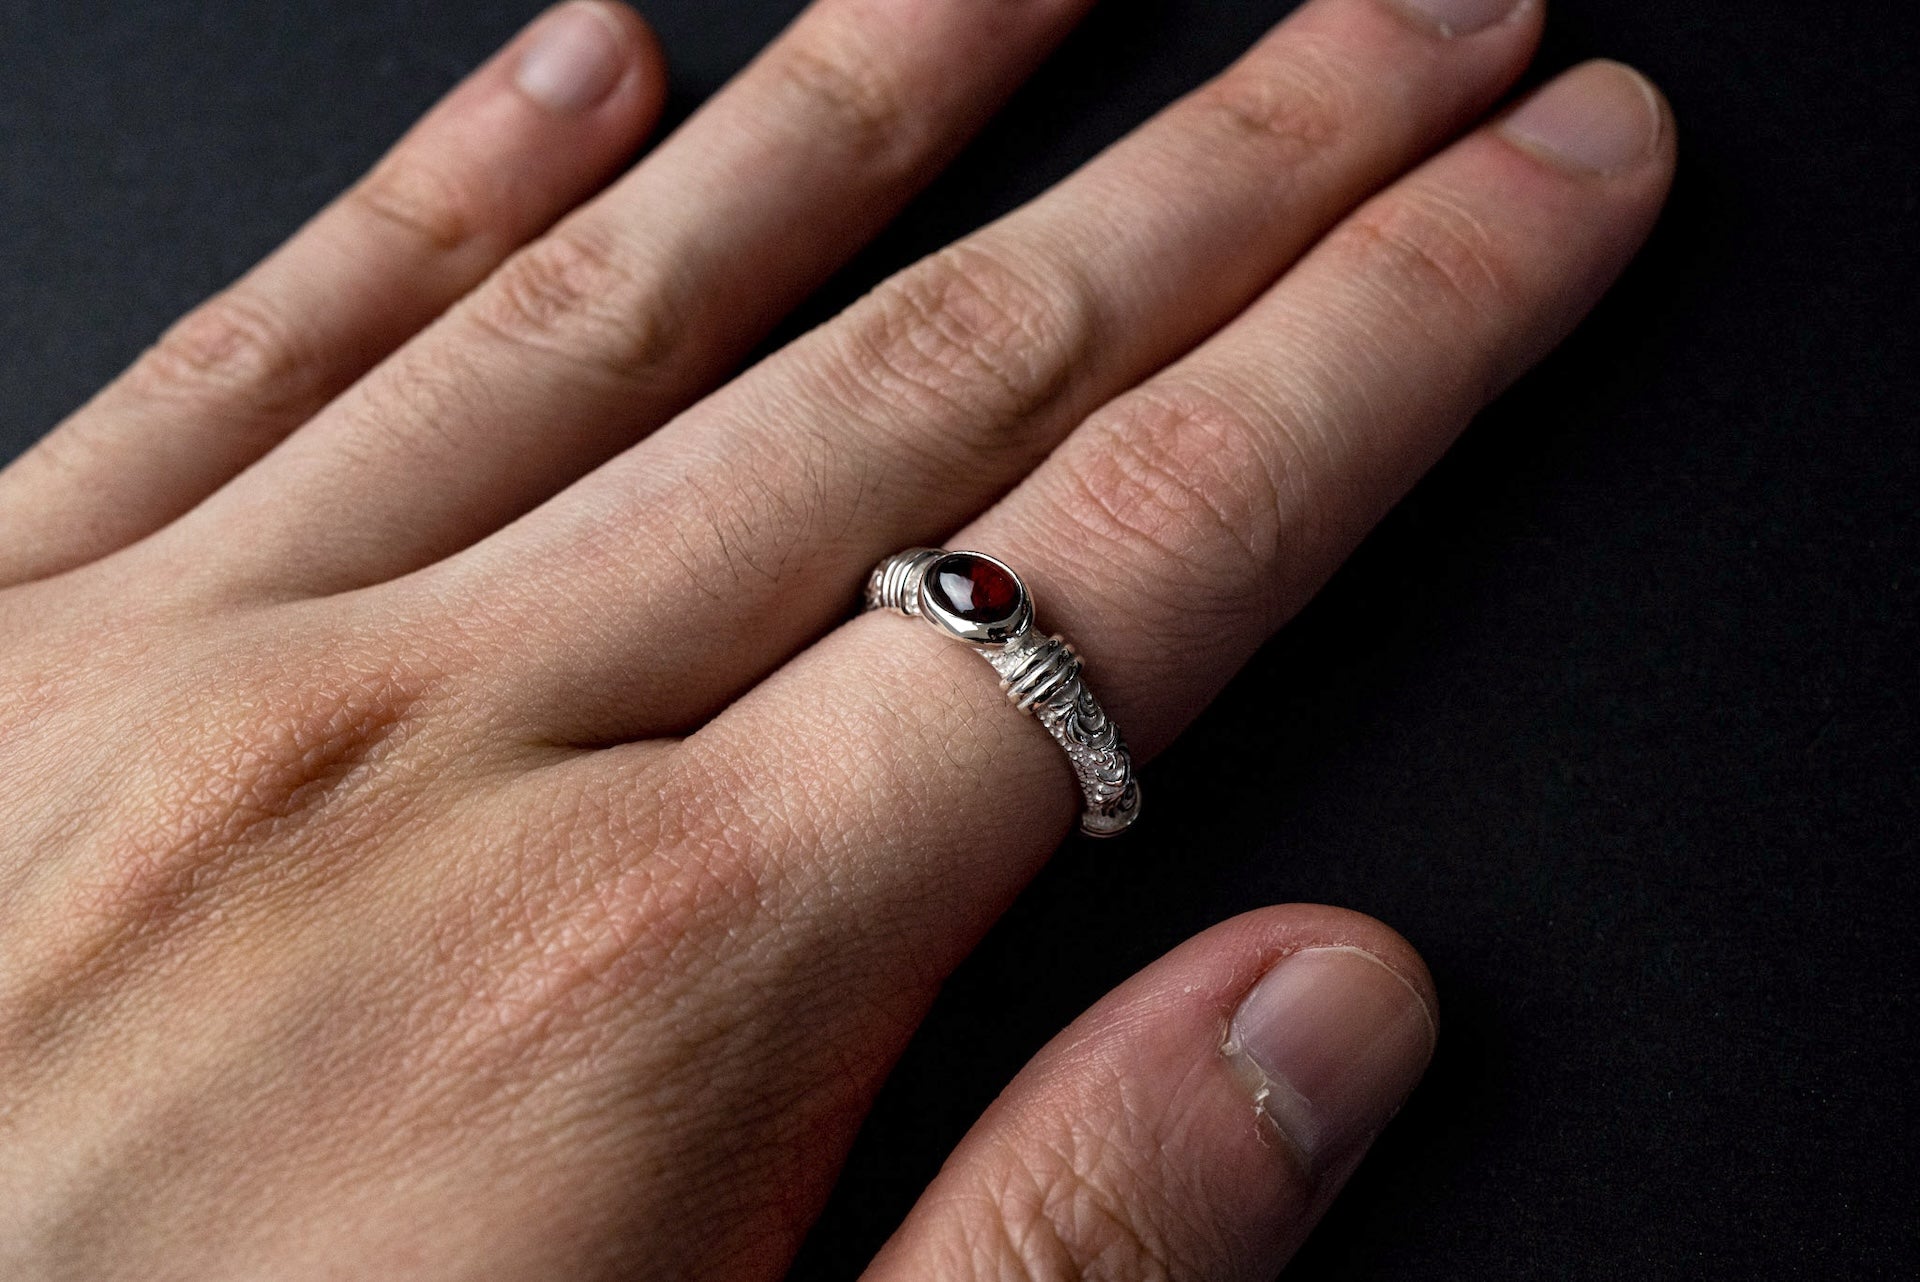 Legend Size Small "Anti-Ghost" Ring with Garnet